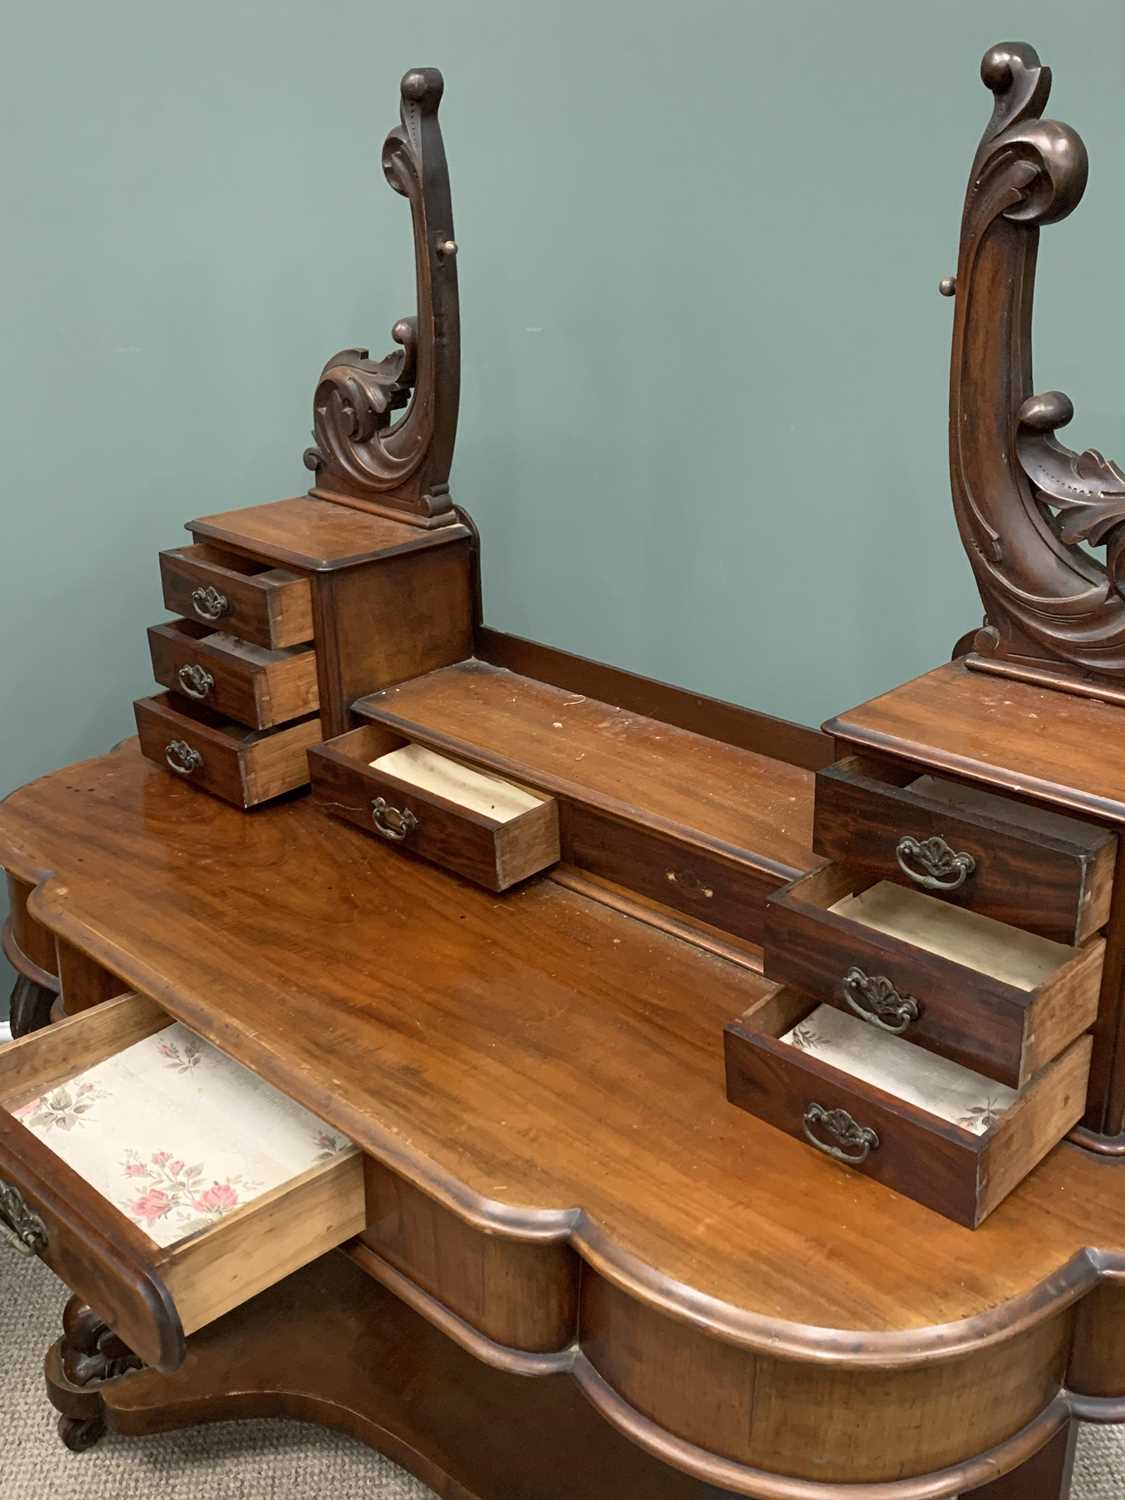 DUCHESS TYPE MAHOGANY DRESSING TABLE (no mirror), 140 (h) x 122 (w) x 54 (d) and another similar - Image 2 of 3